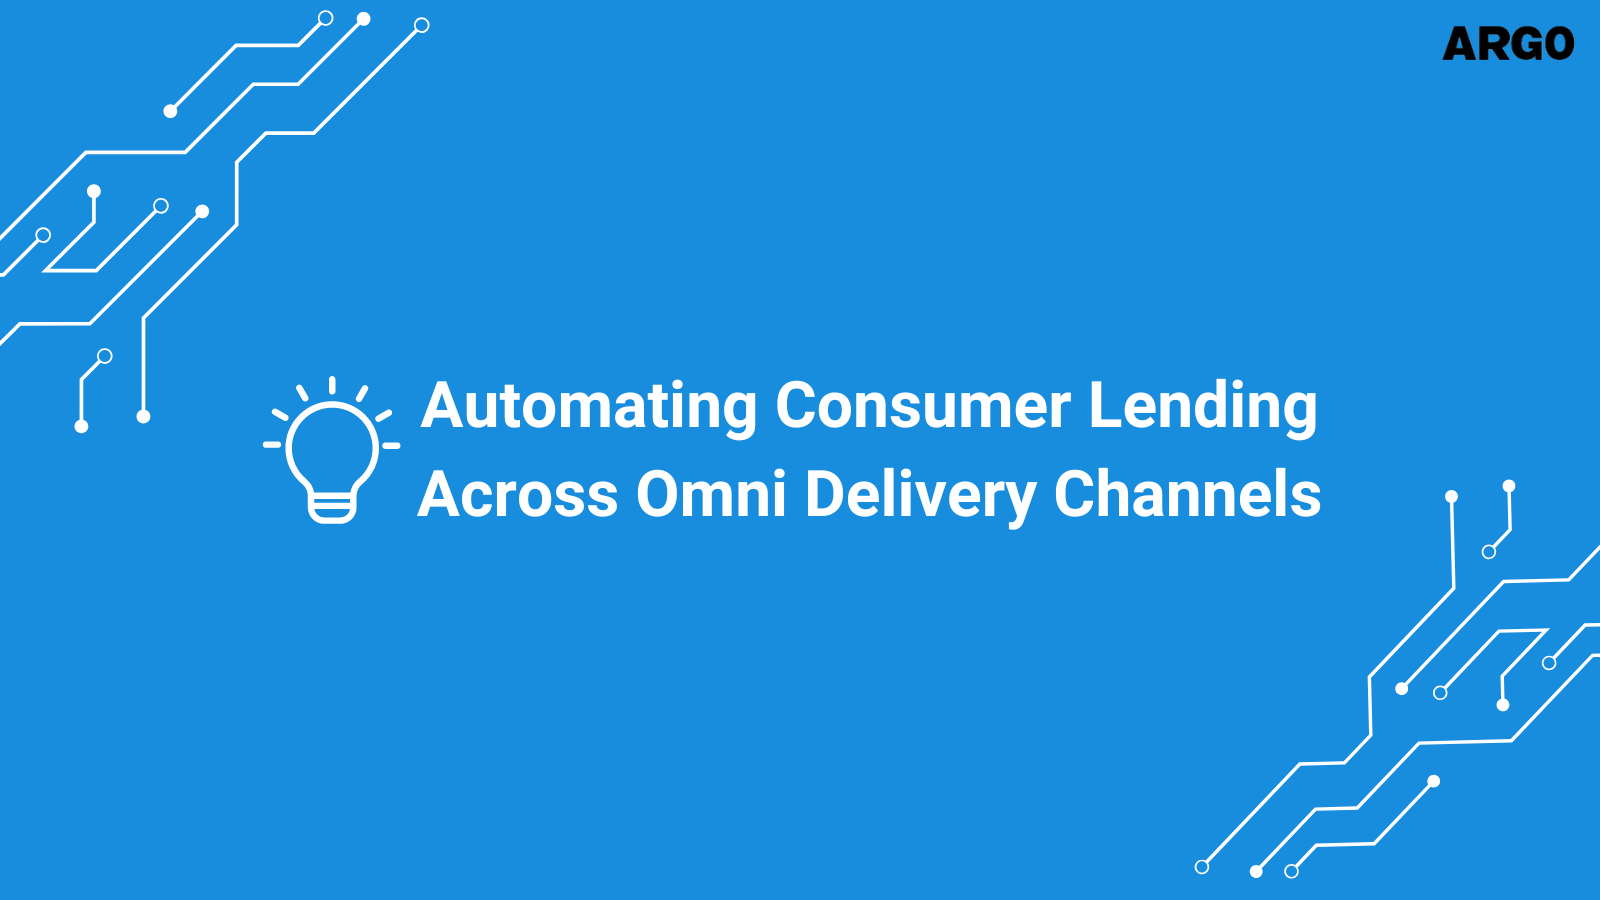 Automating Consumer Lending Across Omni Delivery Channels